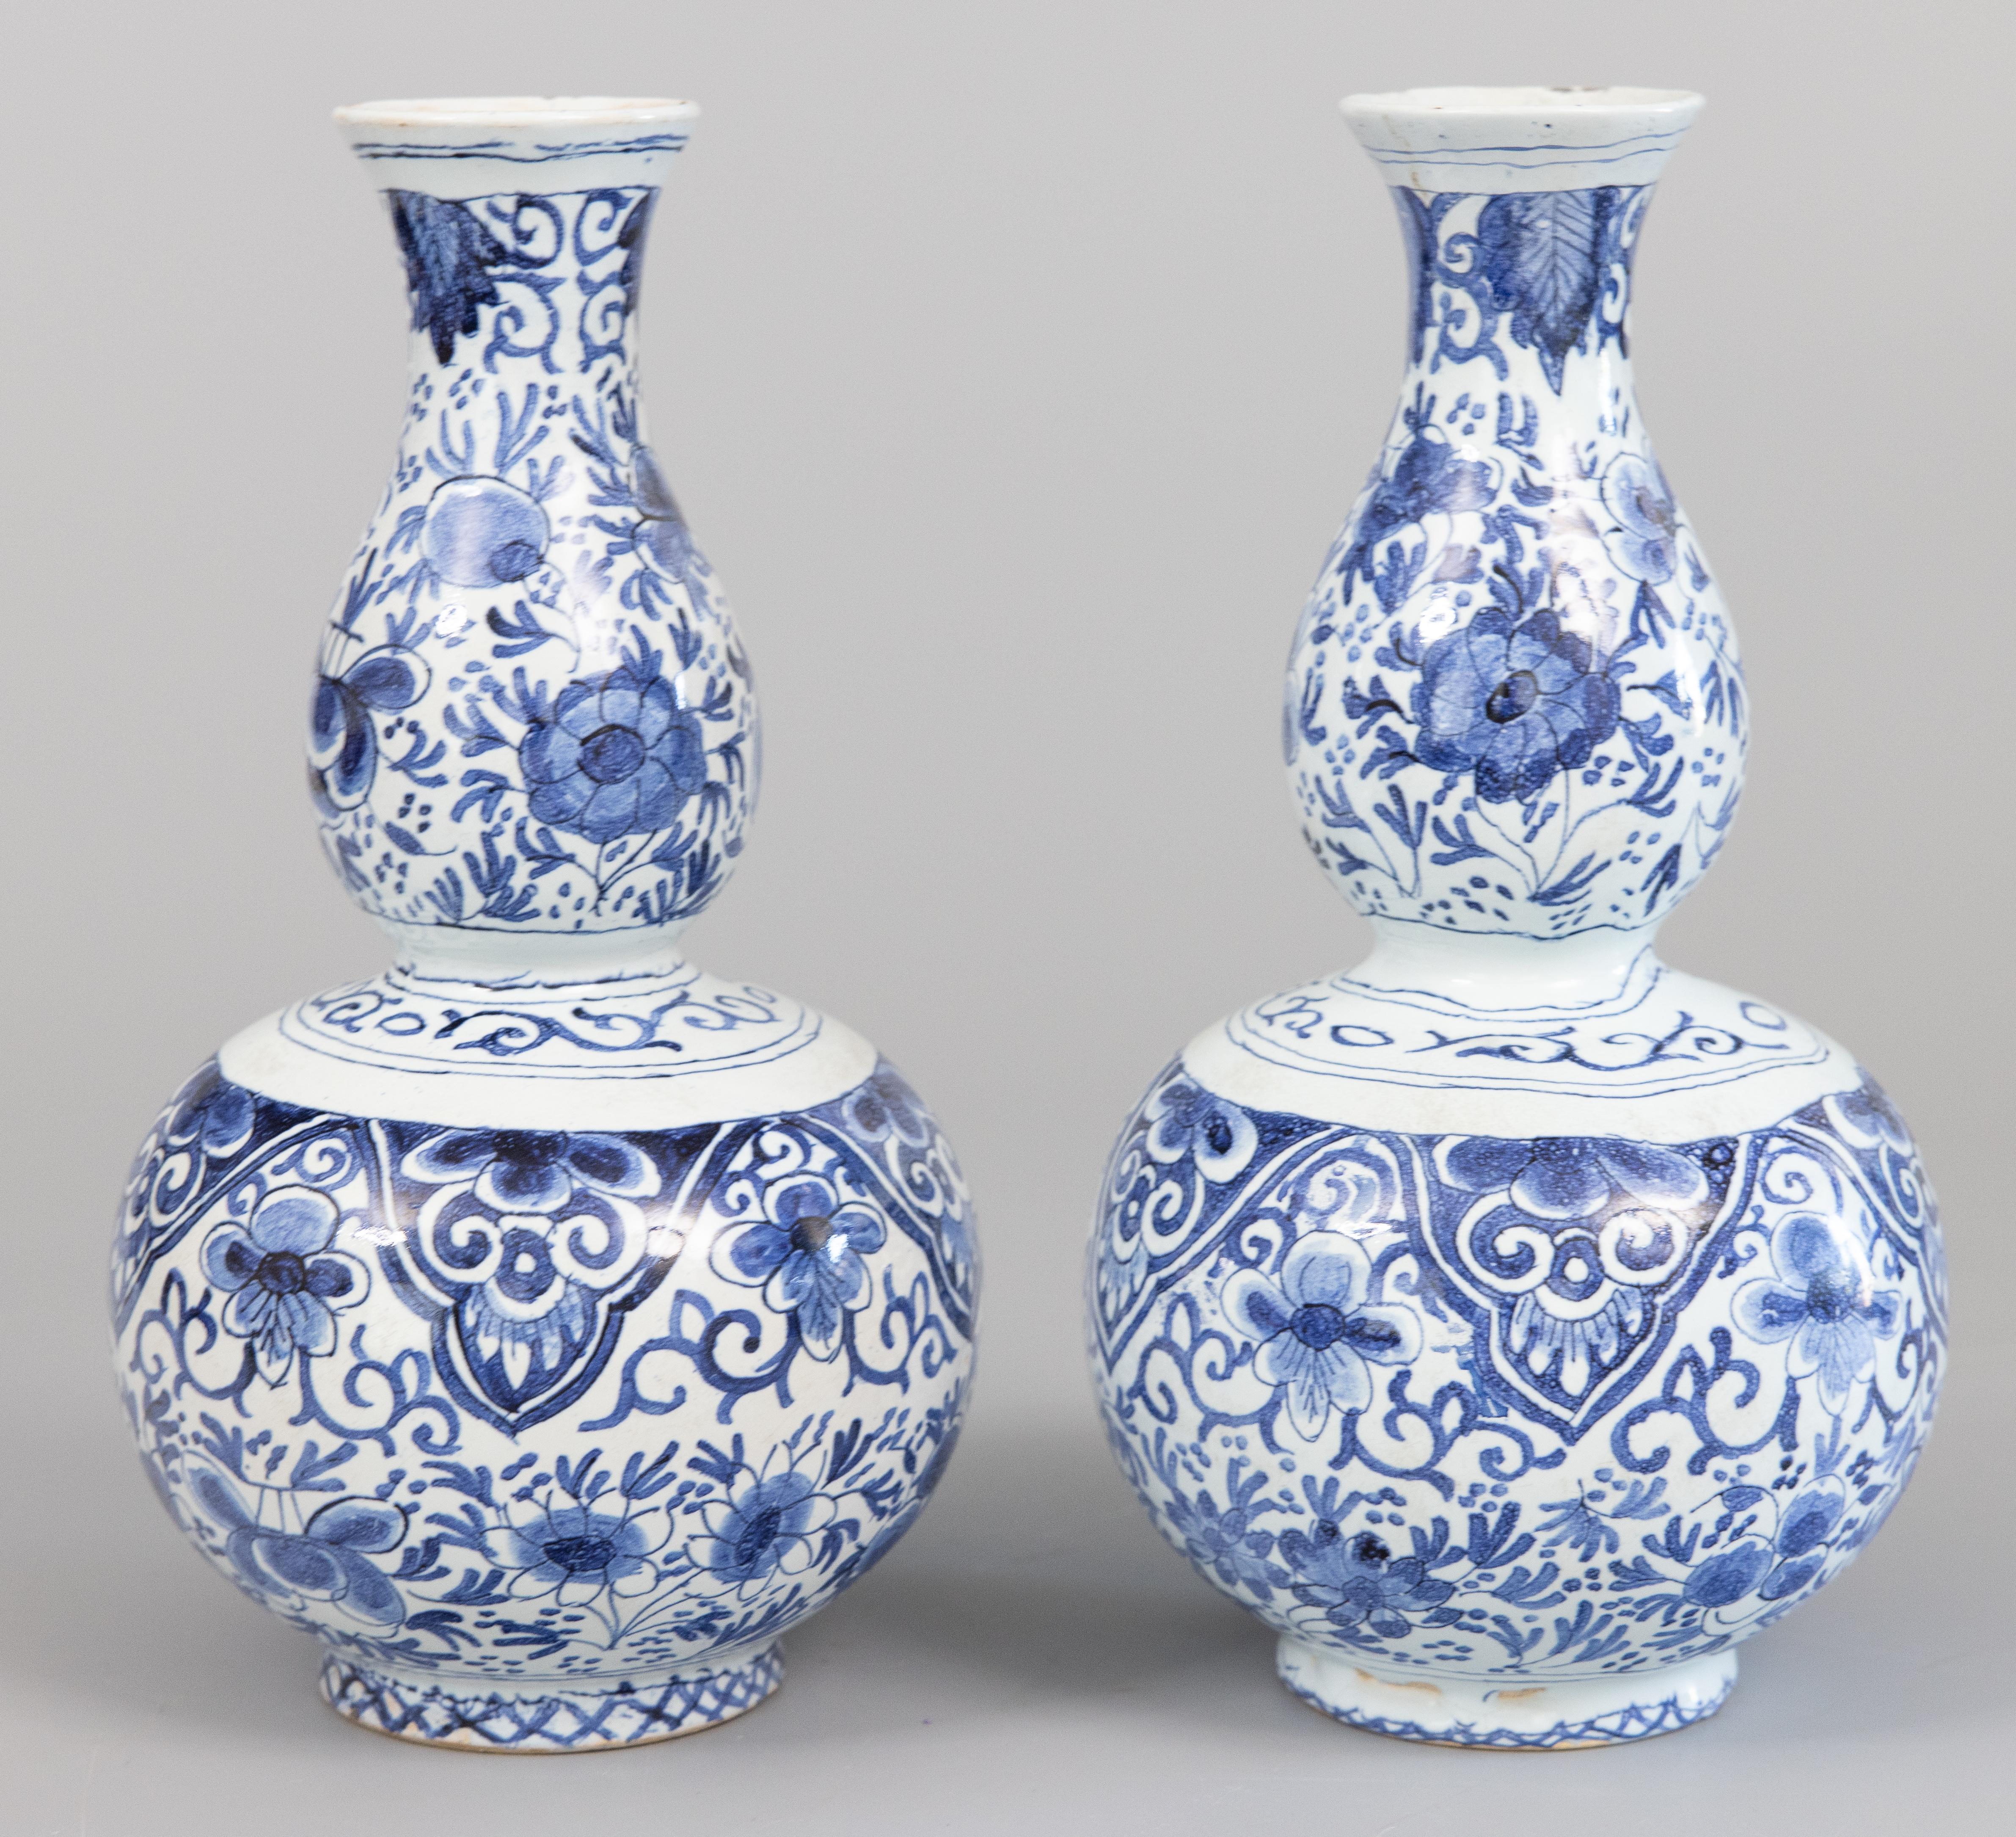 A superb pair of antique Dutch double gourd Delft faience vases, circa 1800. Maker's mark on reverse. These lovely very collectible vases are both hand molded and hand painted with finely detailed floral designs in cobalt blue and white. They have